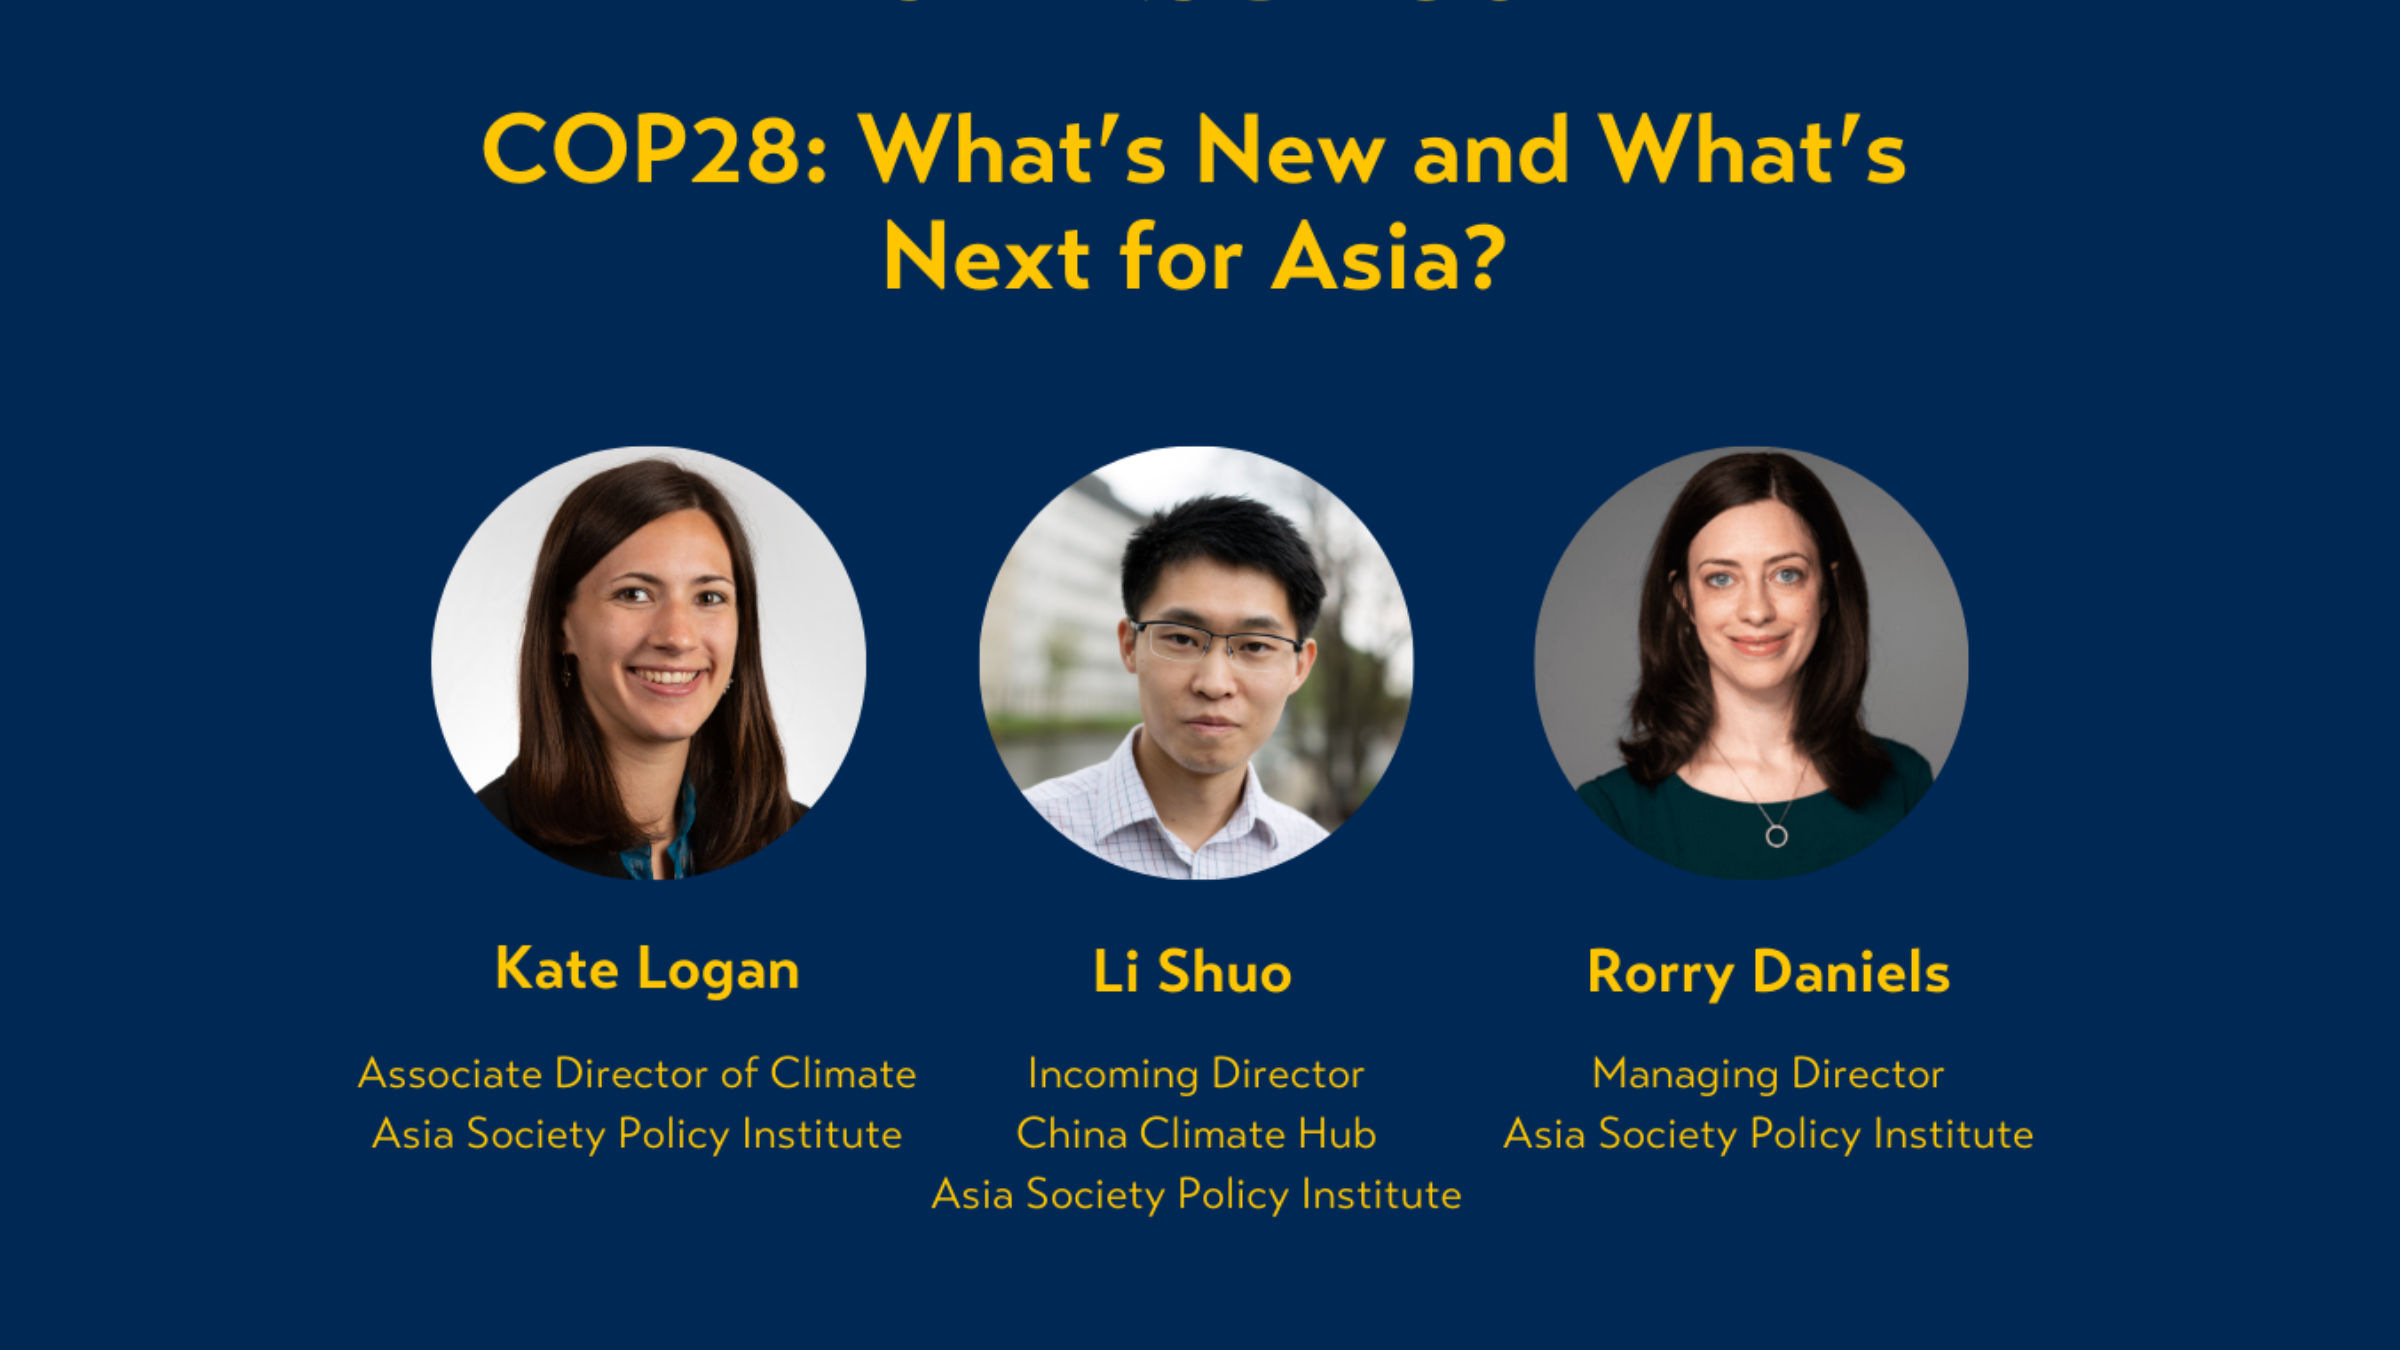 COP28: What’s New and What’s Next for Asia?